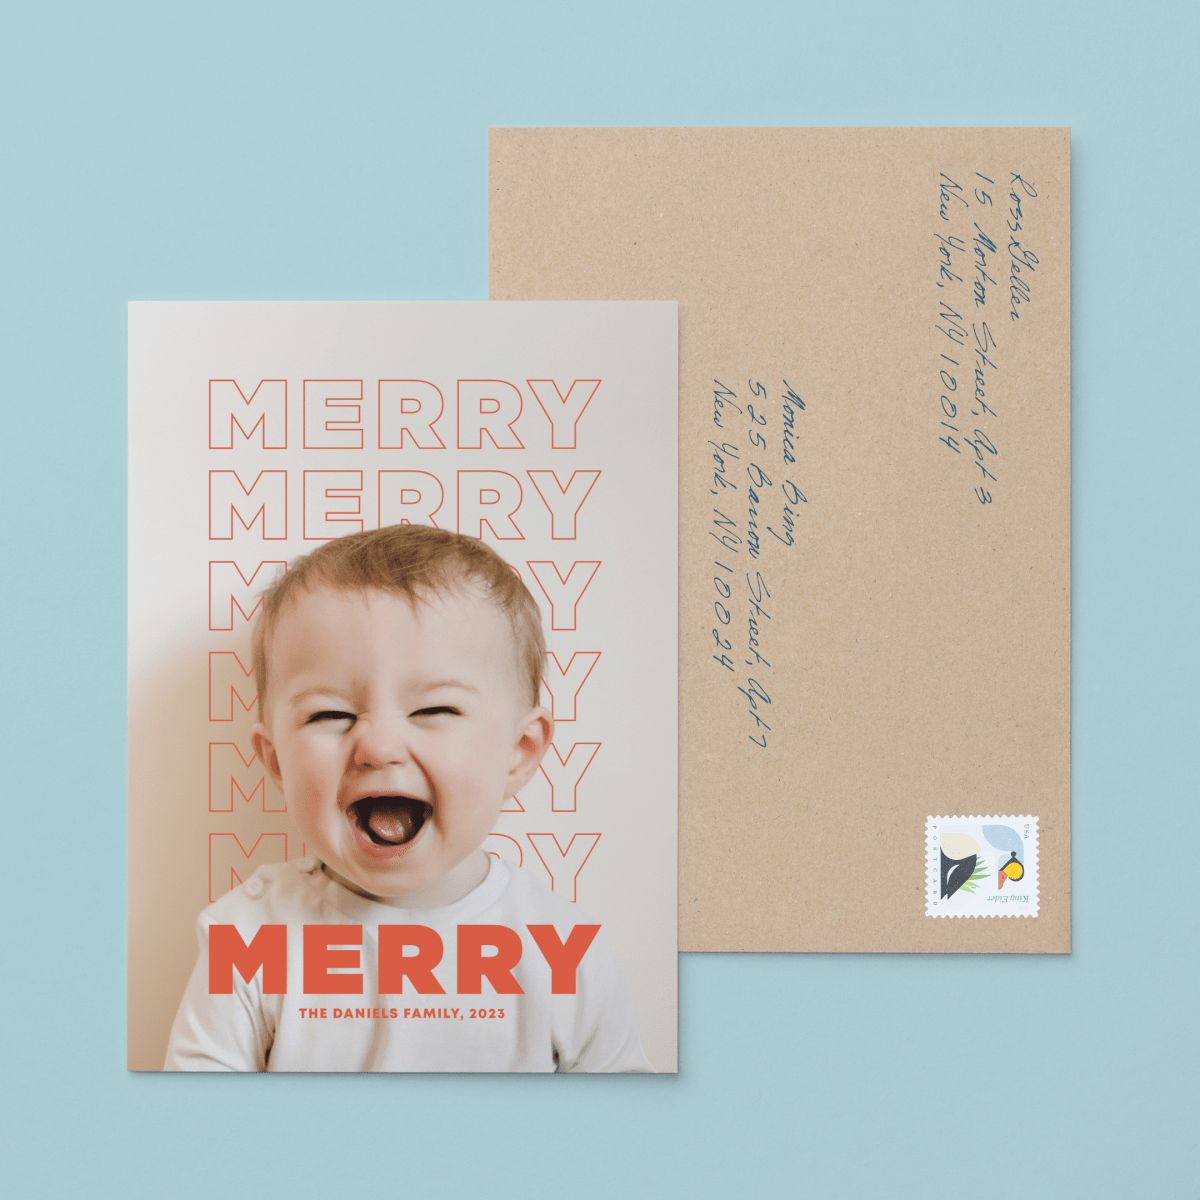 Merry Merry | Postable | Postable